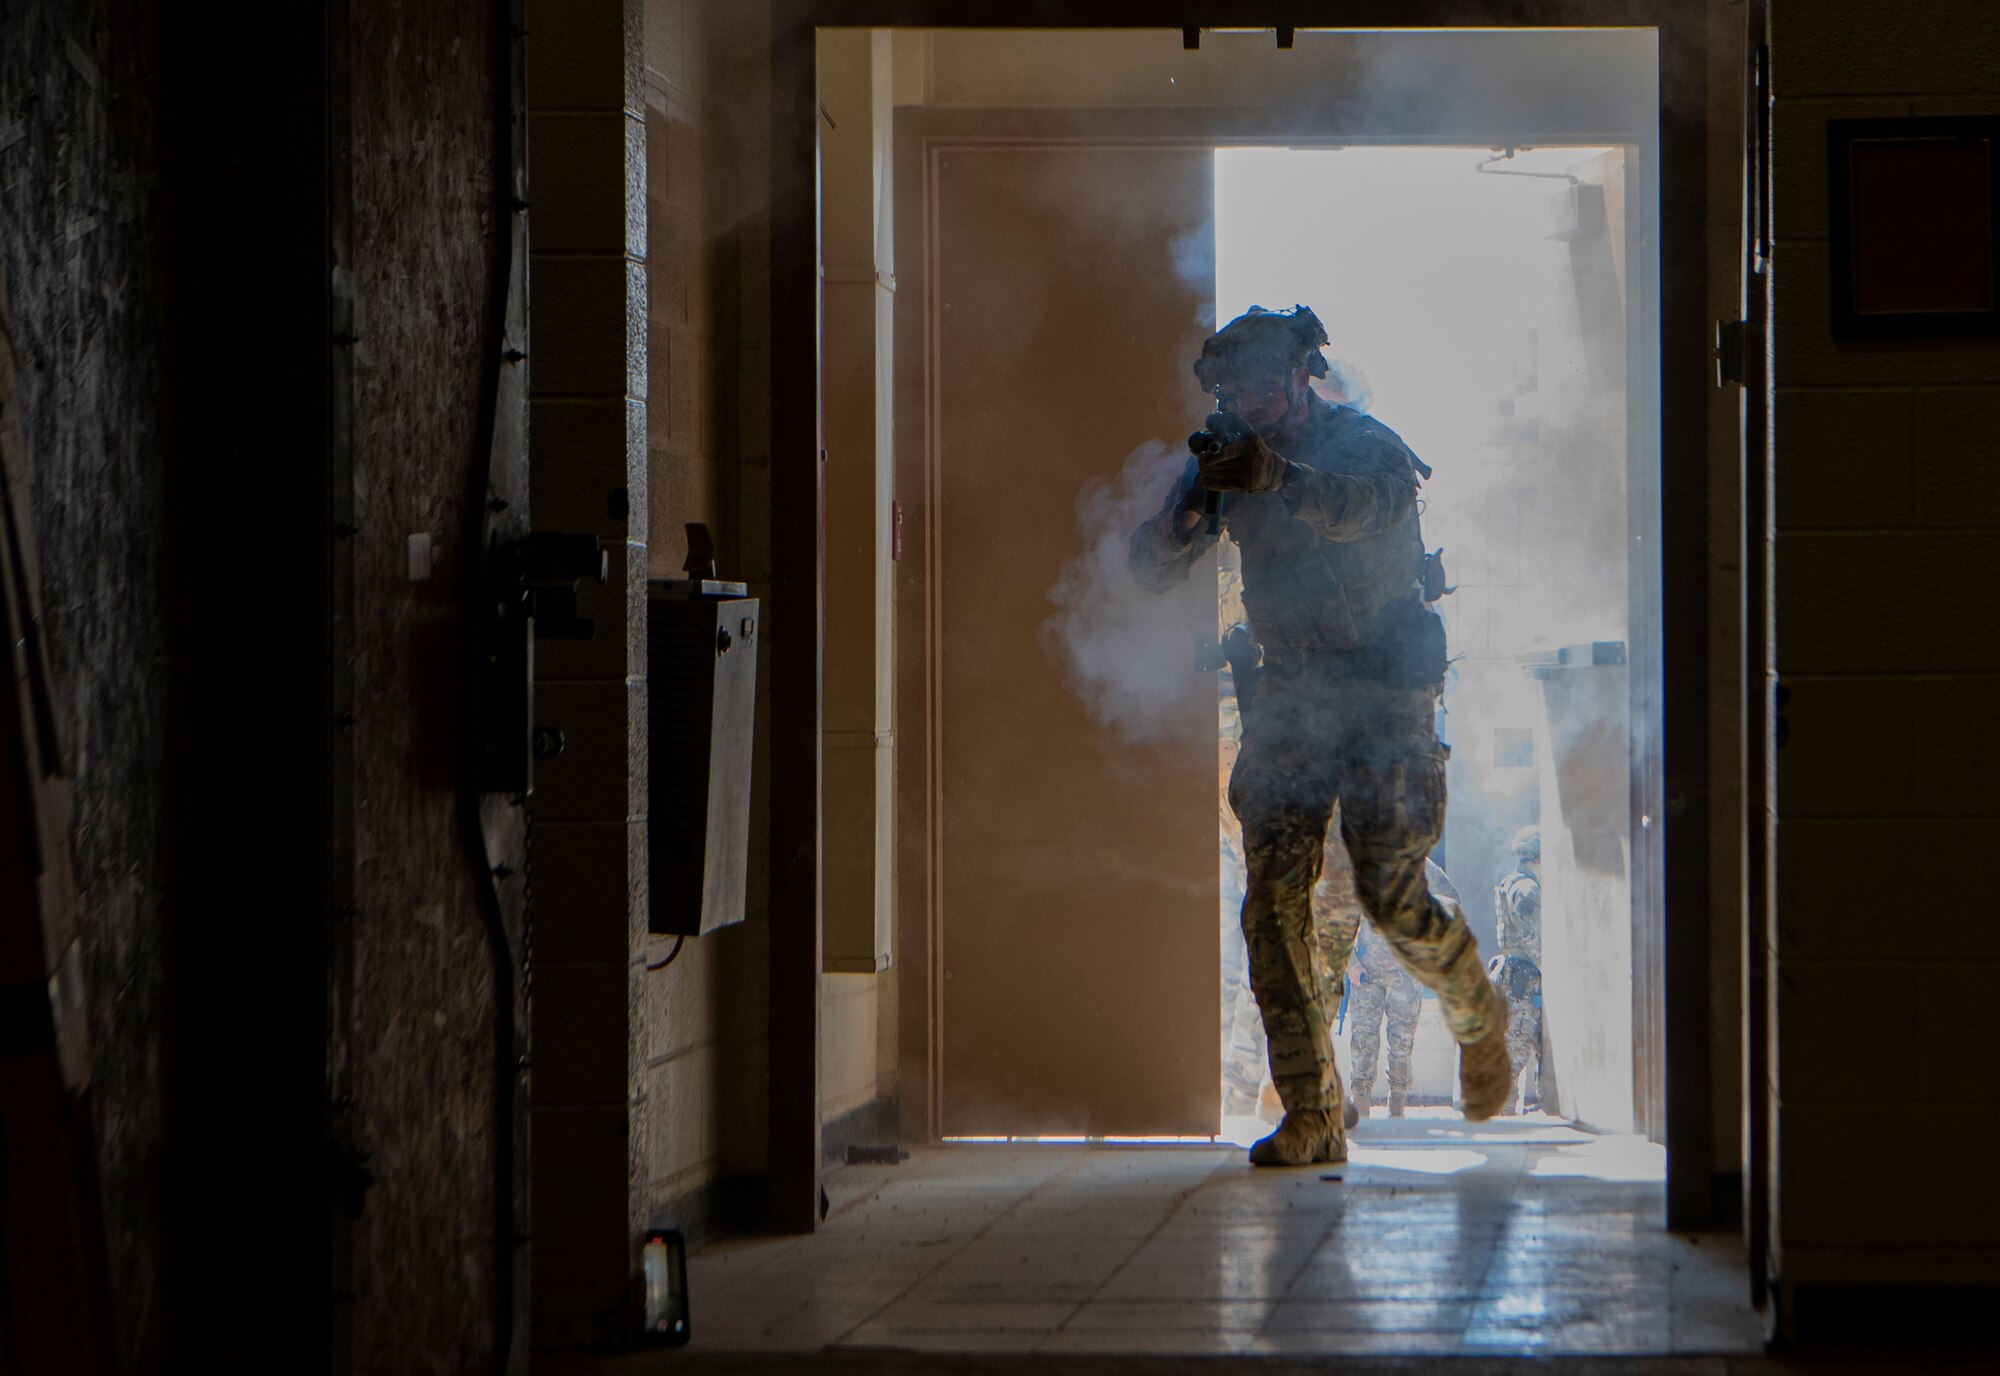 Airman enters building holding a rifle during training.